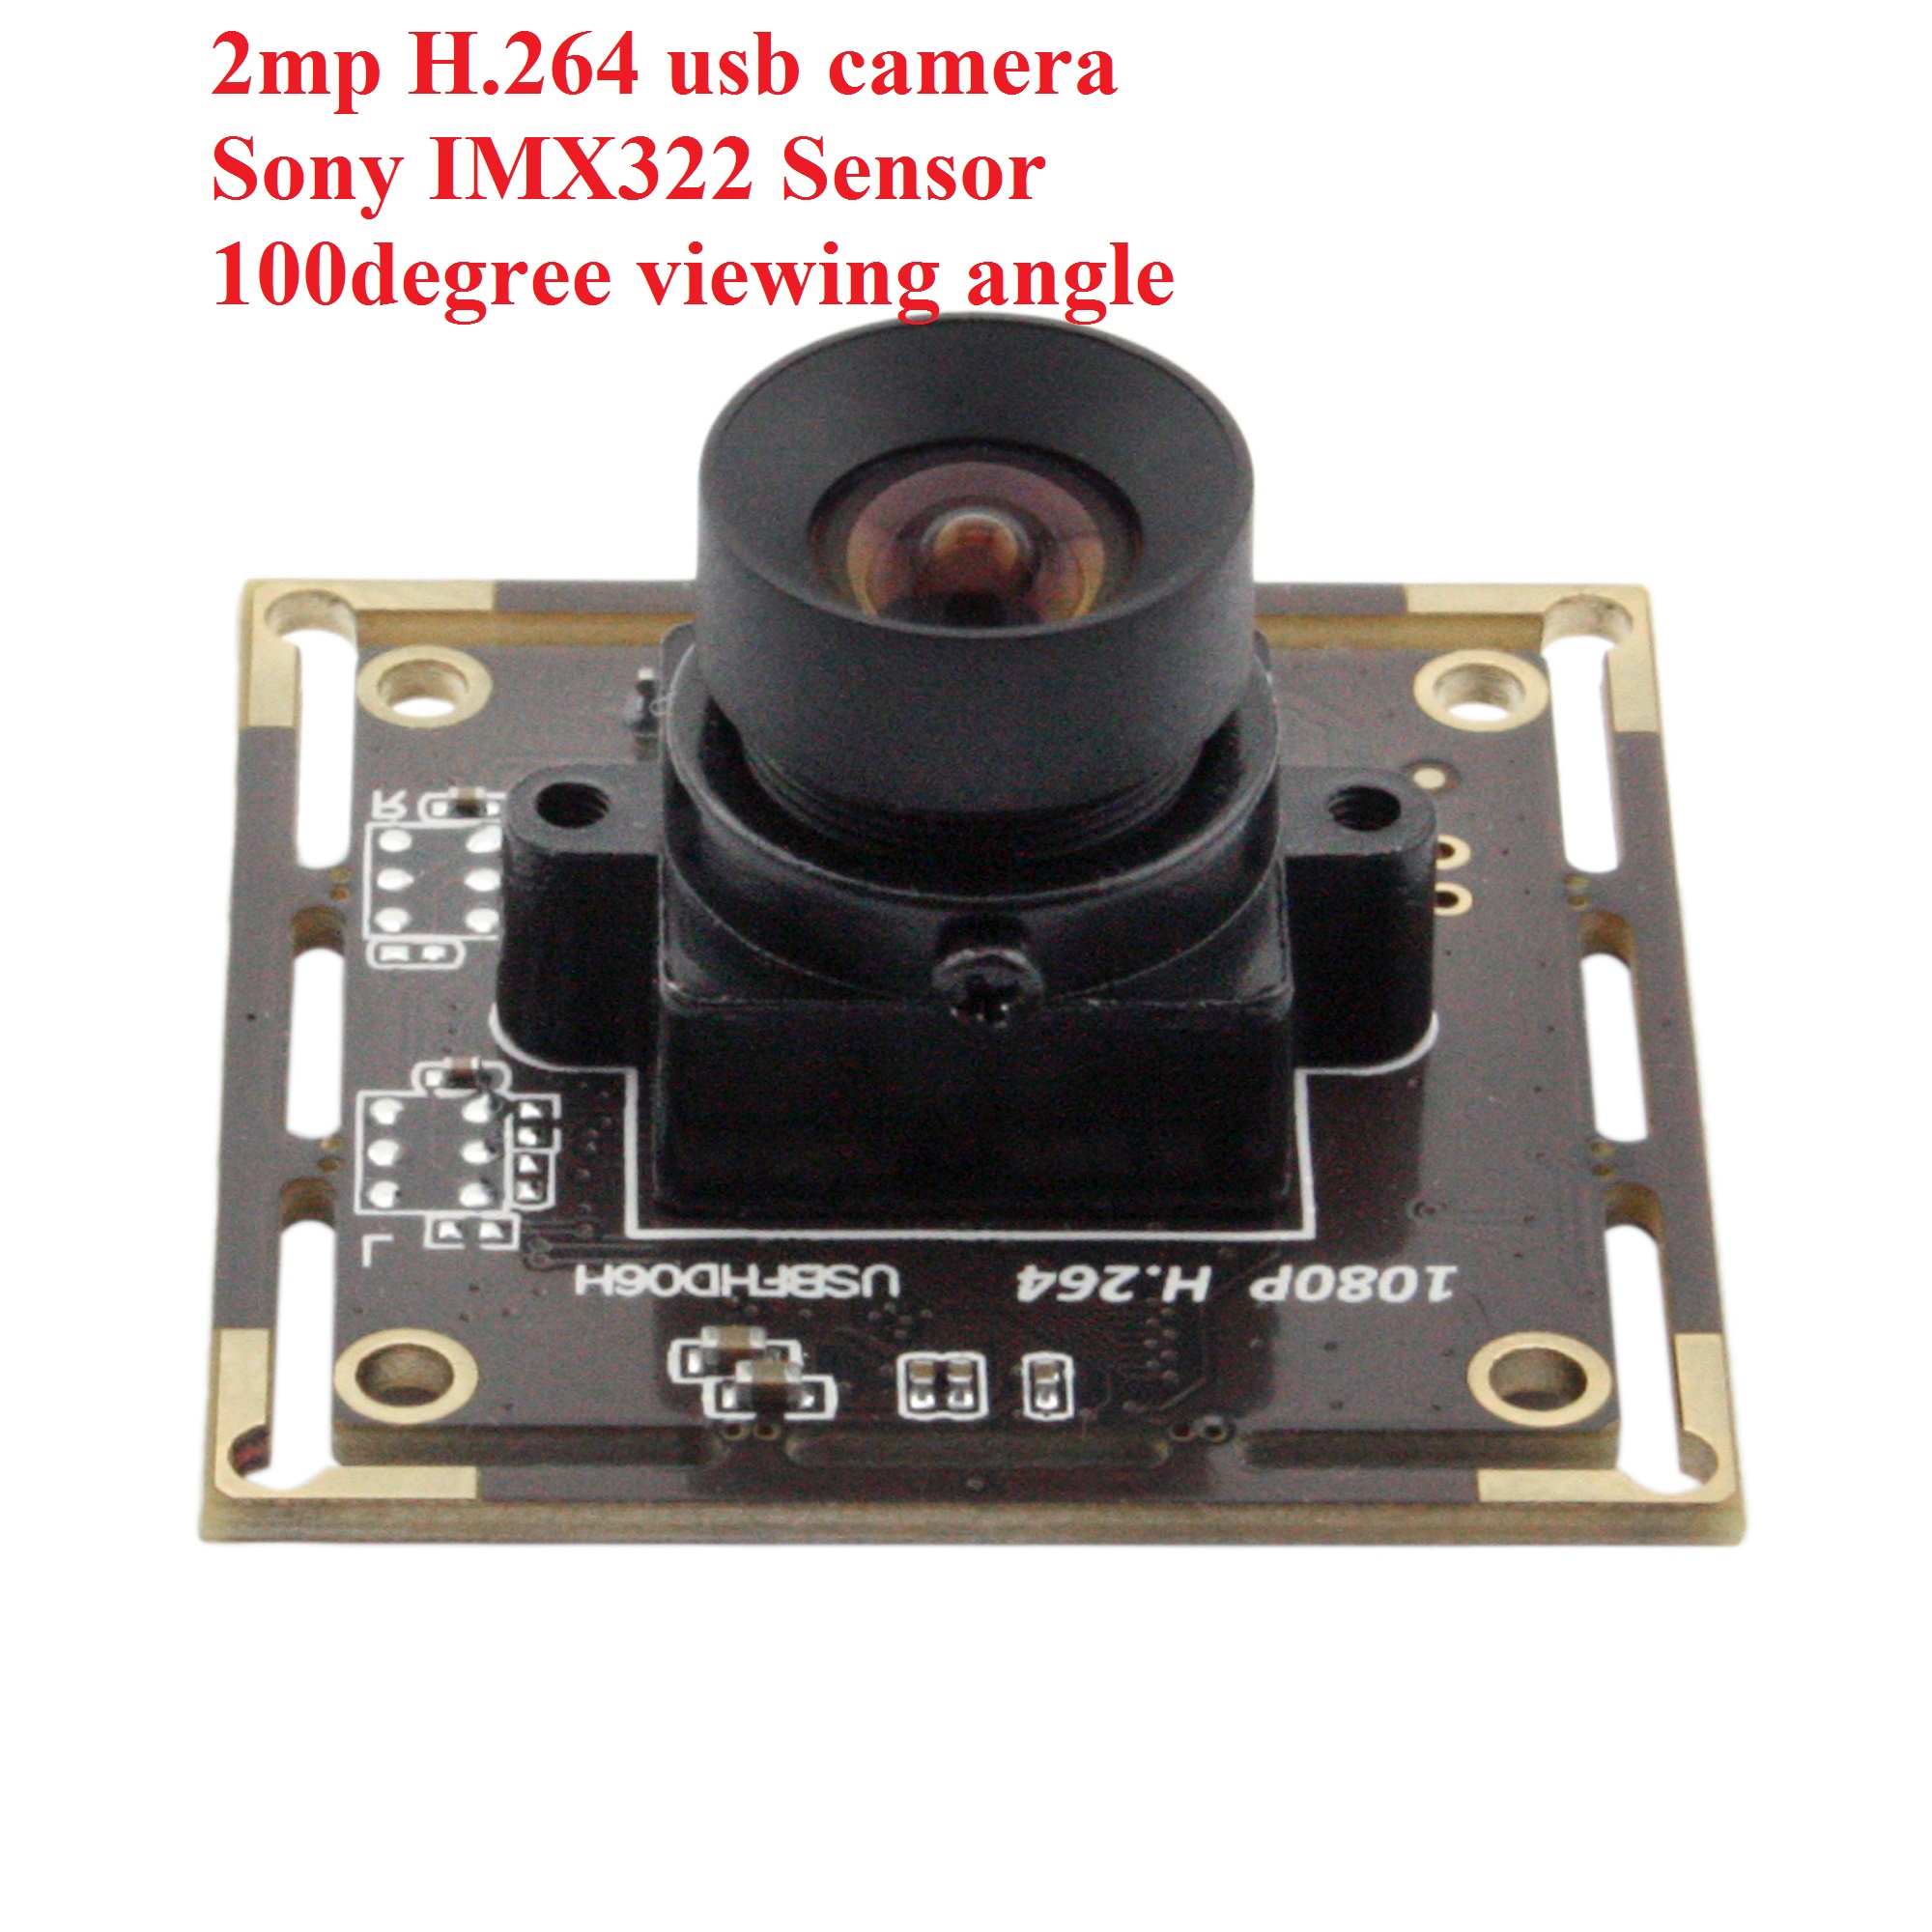 ELP No distortion HD Webcam Low light Sony IMX322/ IMX323 H.264 30fps 1080P mini Security Camera Module for Windows,Linux, Android